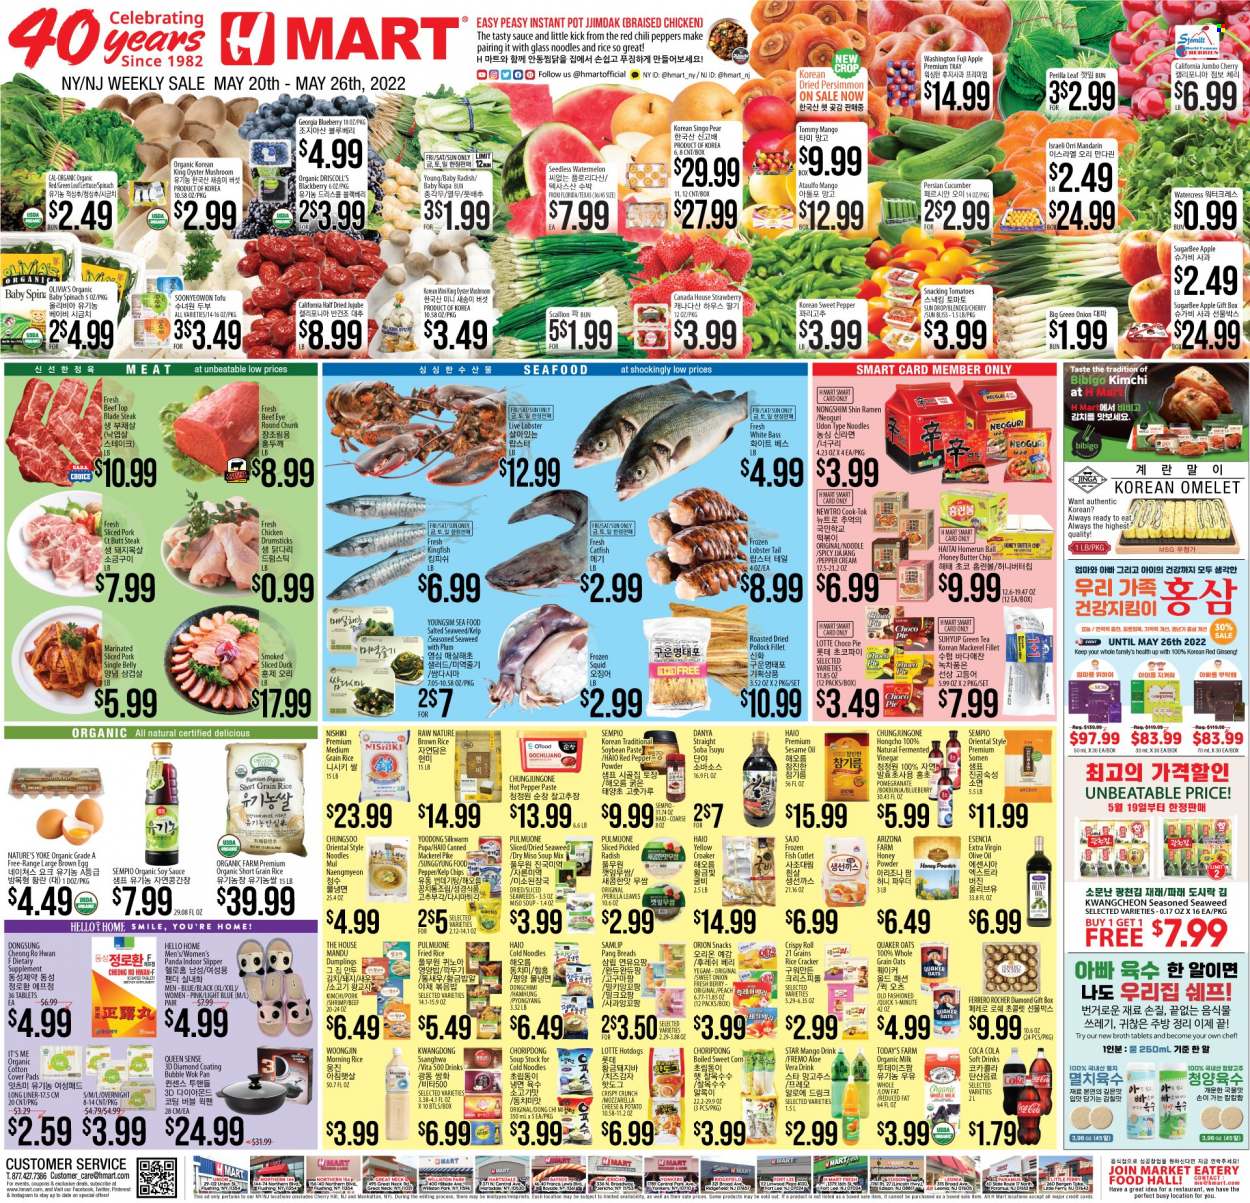 thumbnail - Hmart Flyer - 05/20/2022 - 05/26/2022 - Sales products - oyster mushrooms, pie, tart, corn, radishes, spinach, tomatoes, chili peppers, lettuce, sweet corn, green onion, mandarines, watermelon, pears, persimmons, jujube, Fuji apple, chayote, catfish, lobster, mackerel, squid, pollock, oysters, seafood, fish, lobster tail, king fish, shrimps, ramen, soup, dumplings, Quaker, noodles, mozzarella, tofu, organic milk, eggs, butter, snack, Ferrero Rocher, crackers, rice crackers, oats, seaweed, broth, brown rice, short grain rice, watercress, miso, soy sauce, extra virgin olive oil, sesame oil, olive oil, oil, honey, Coca-Cola, soft drink, AriZona, green tea, tea, chicken drumsticks, beef meat, steak, eye of round, top blade, tray, pot, pan, wok, ginseng, pomegranate. Page 1.